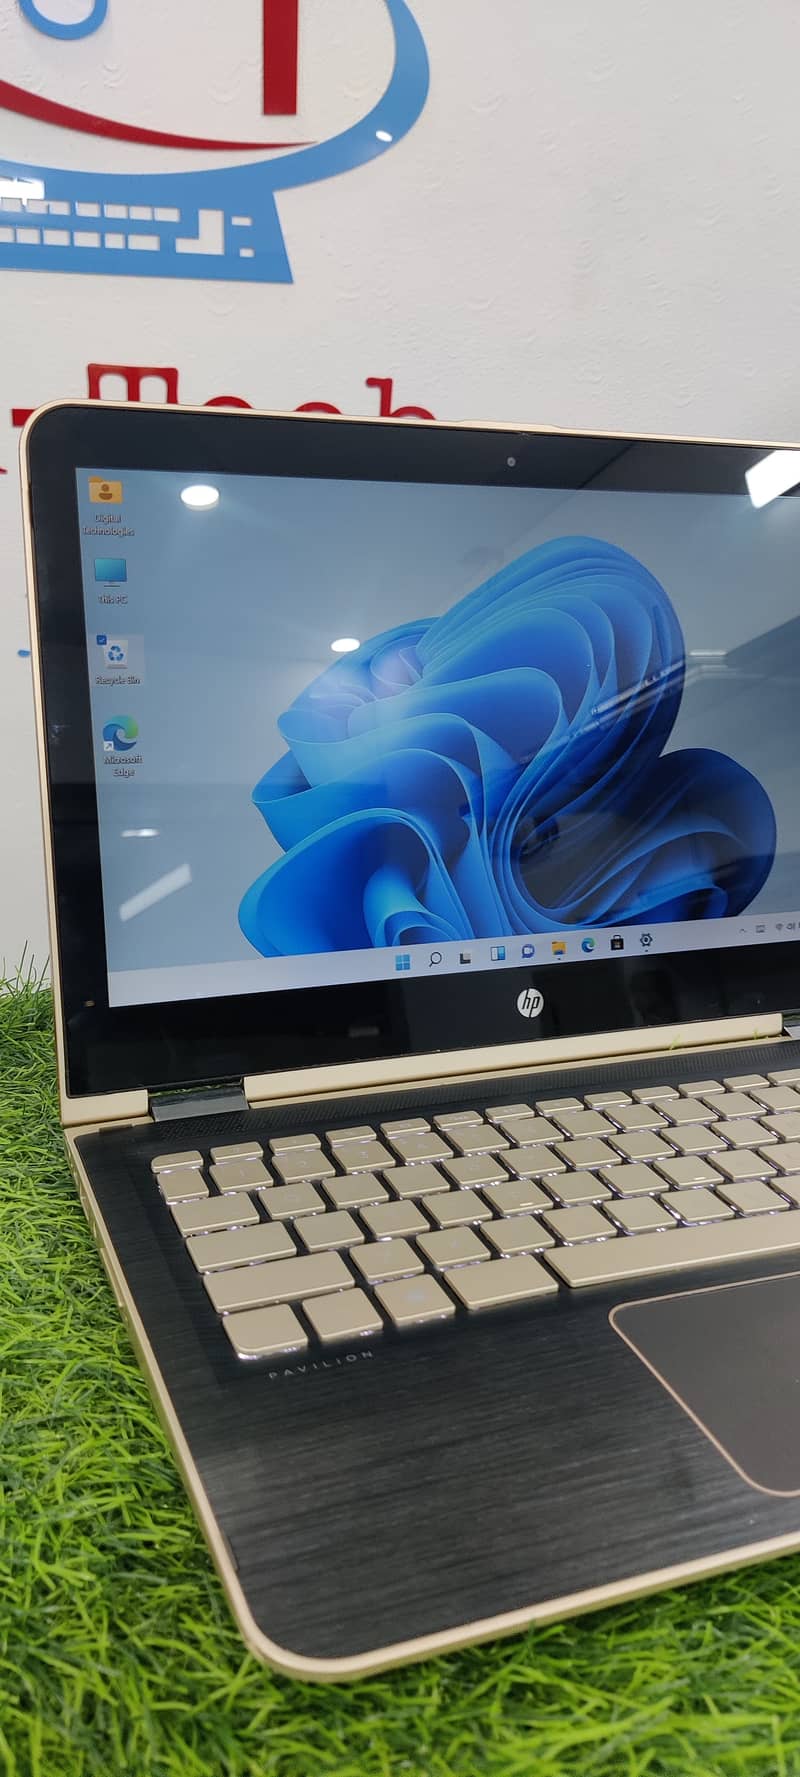 Hp Pavilion m3 Core i5 6th Generation X360 Full HD Touch IPS display 8